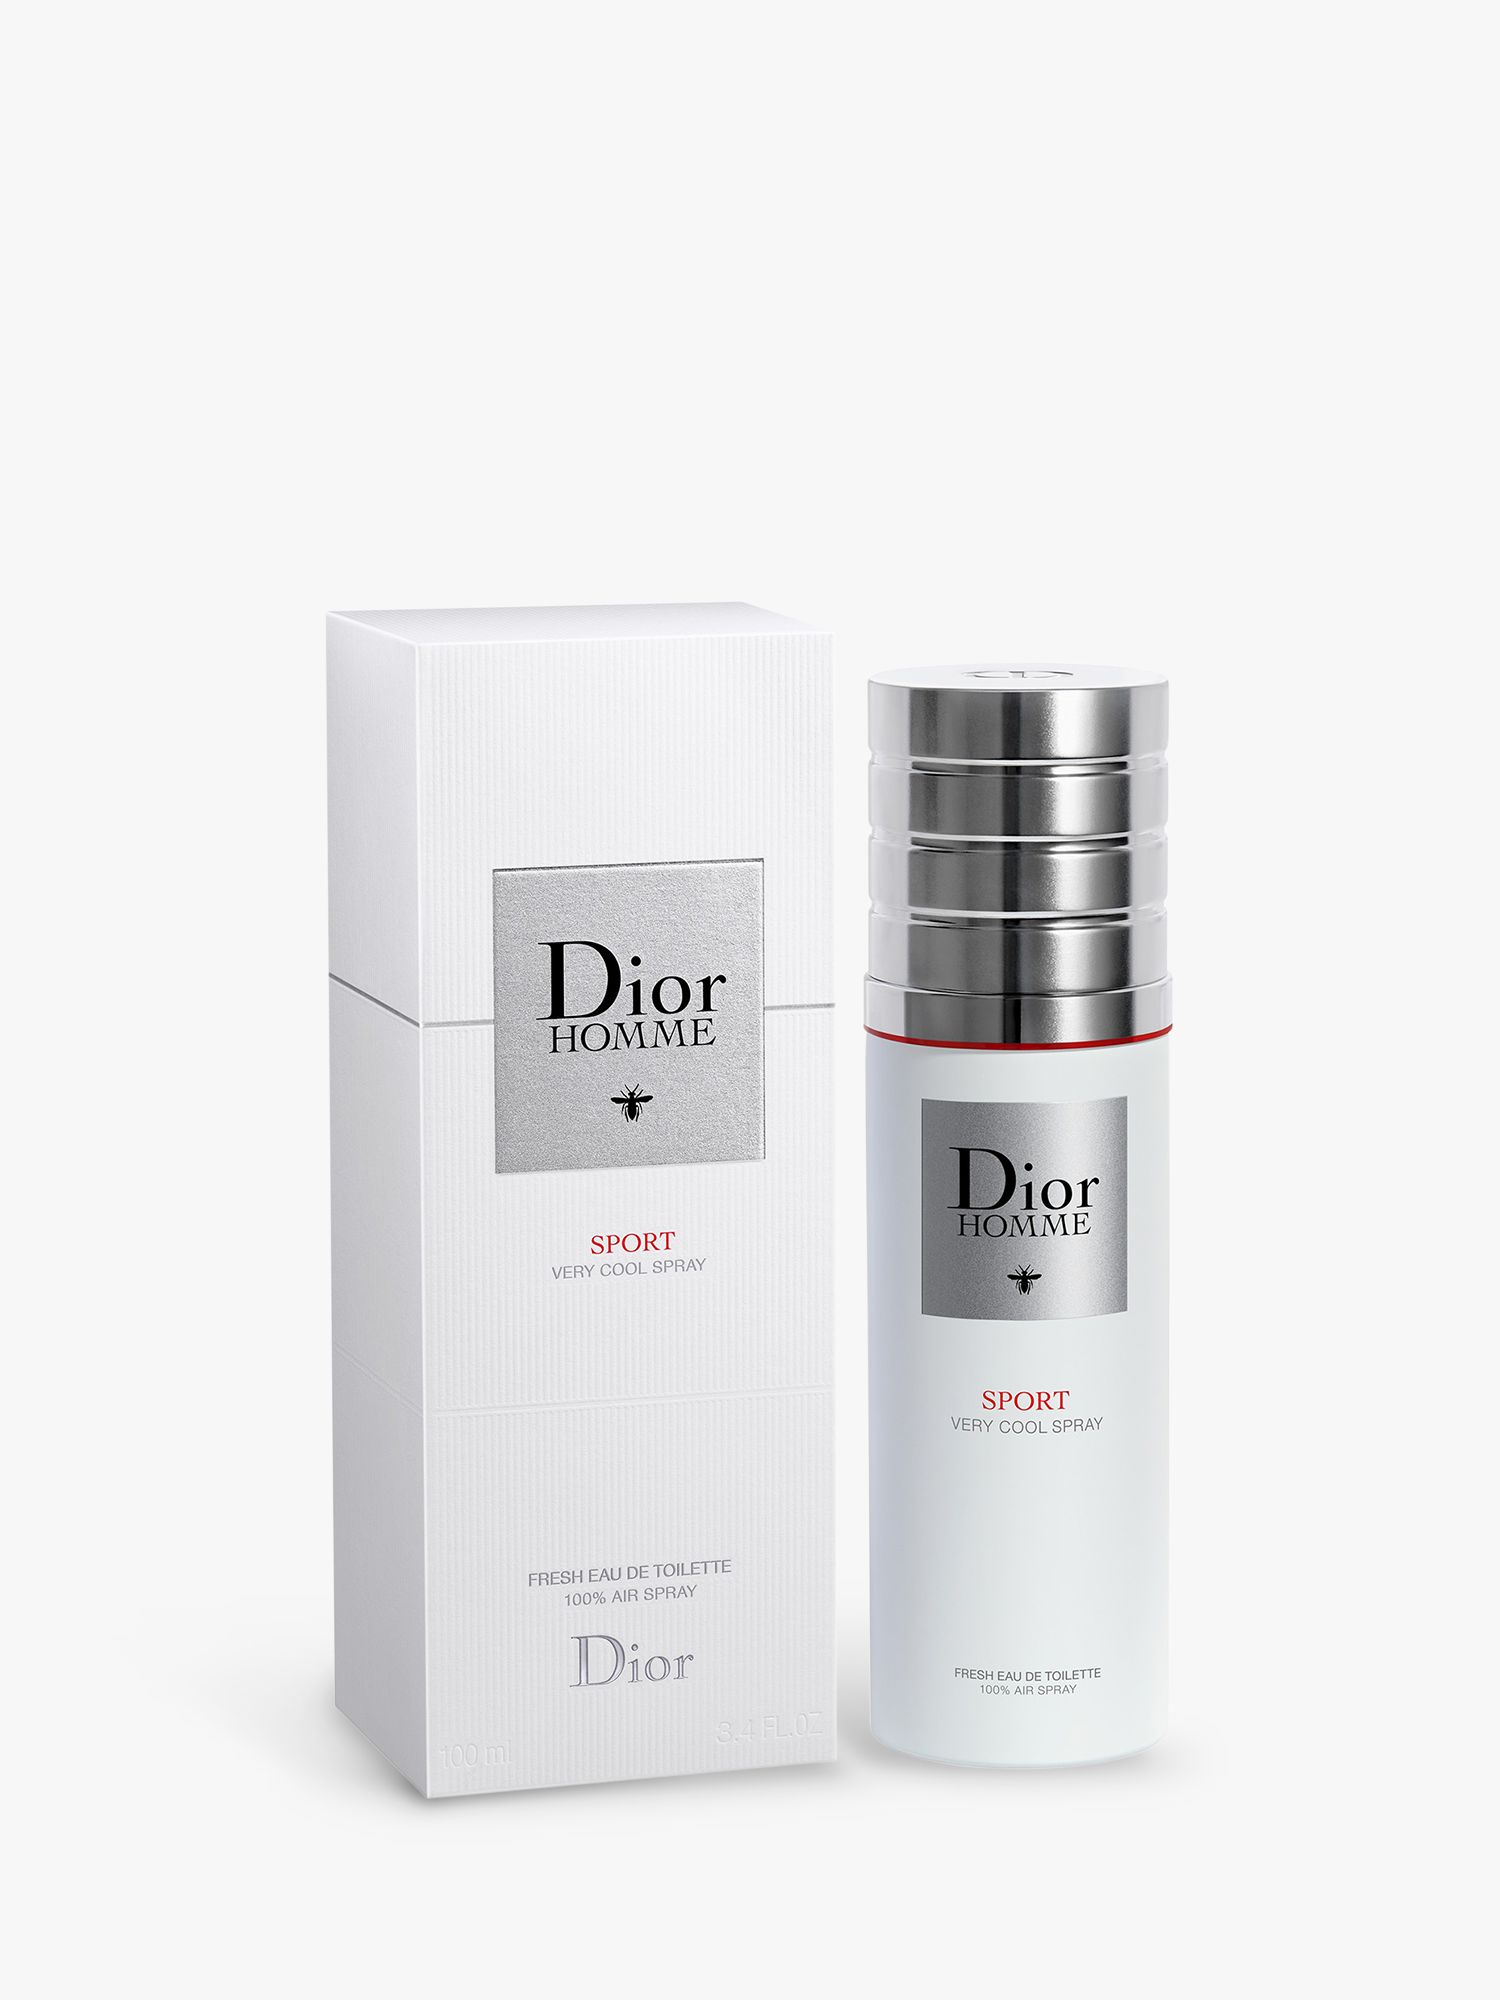 dior homme sport very cool spray review